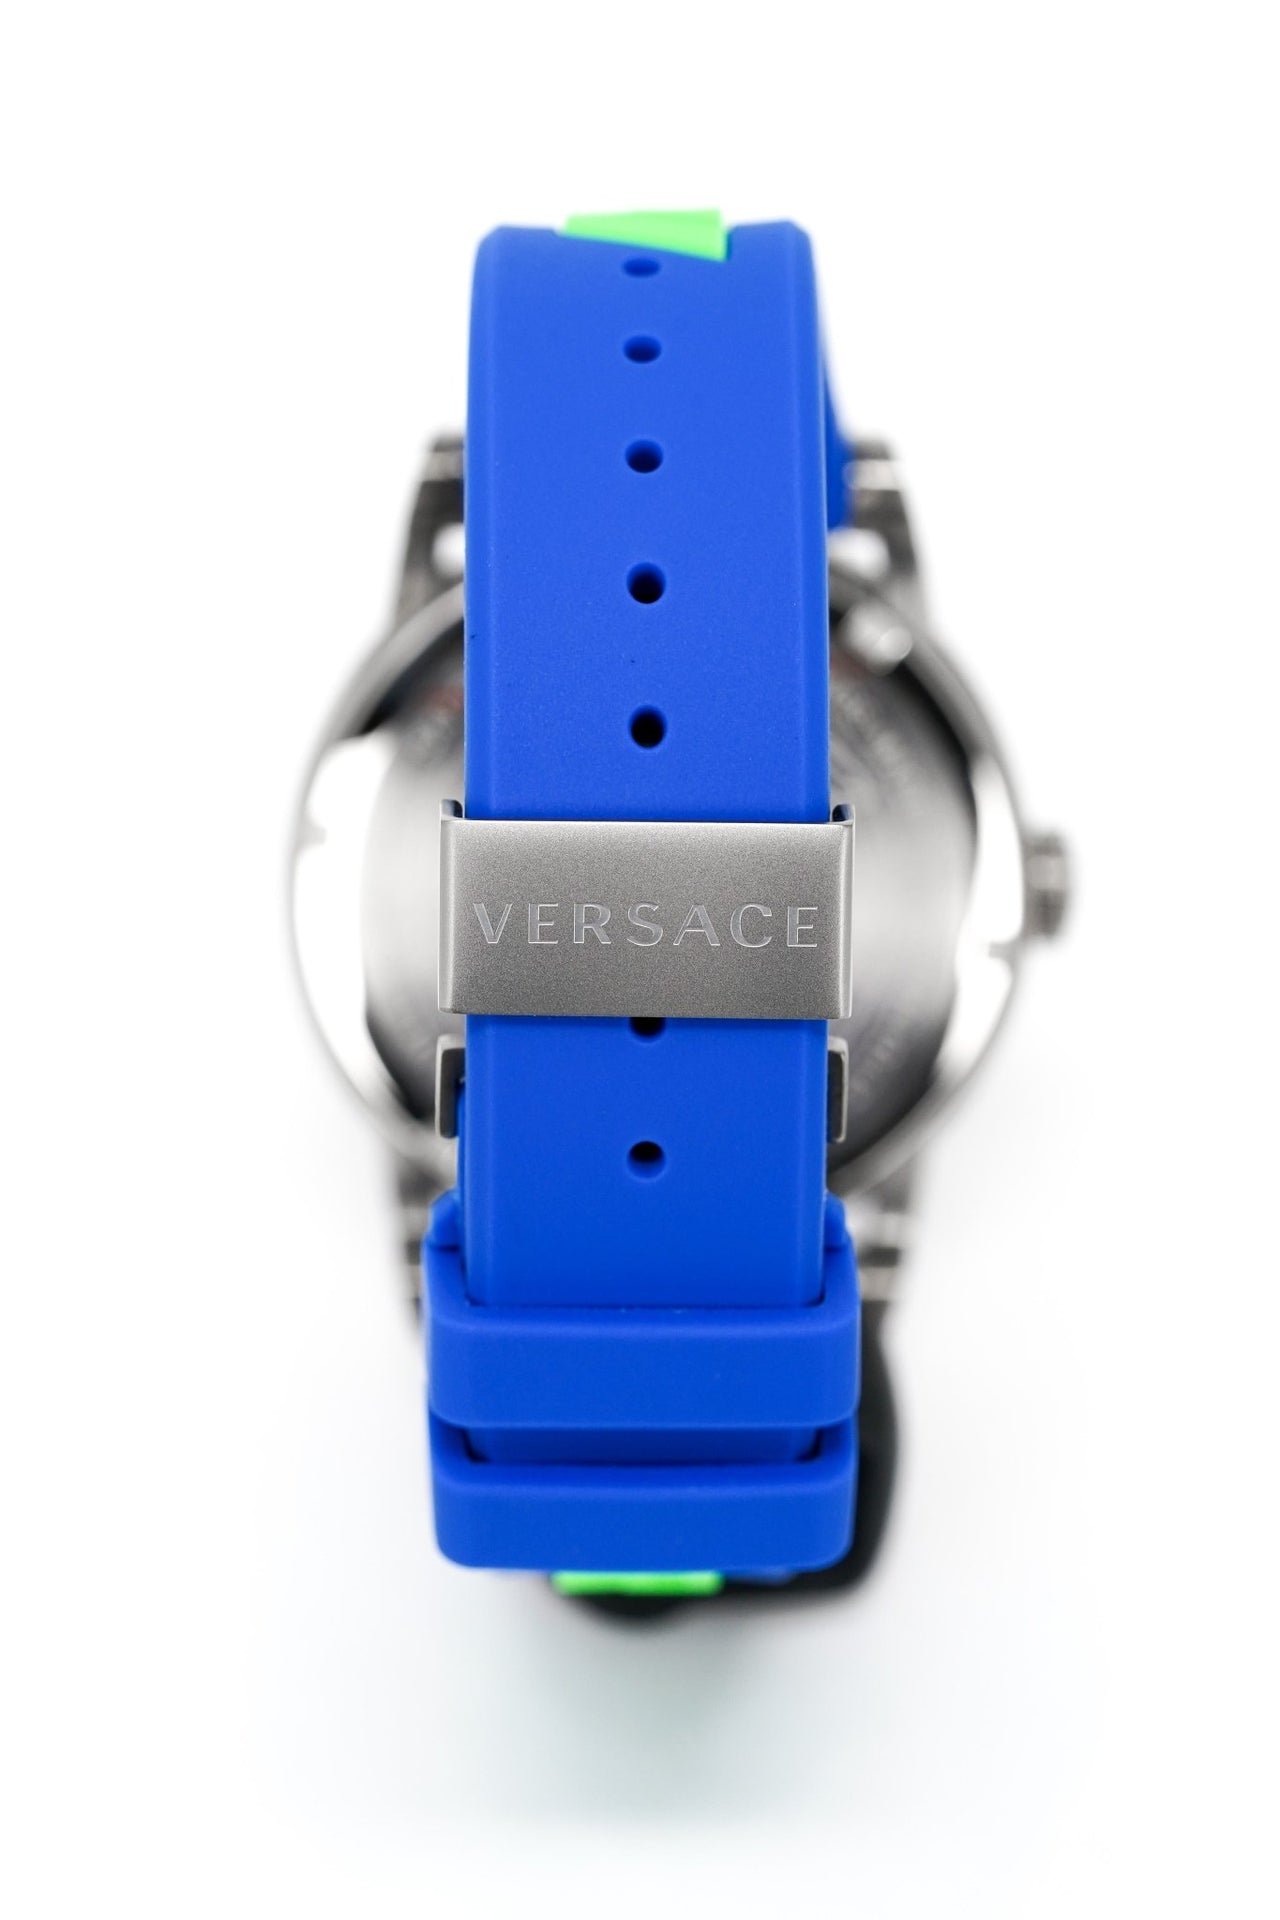 Versace Men's Watch V-Palazzo Blue VE2V00722 - Watches & Crystals